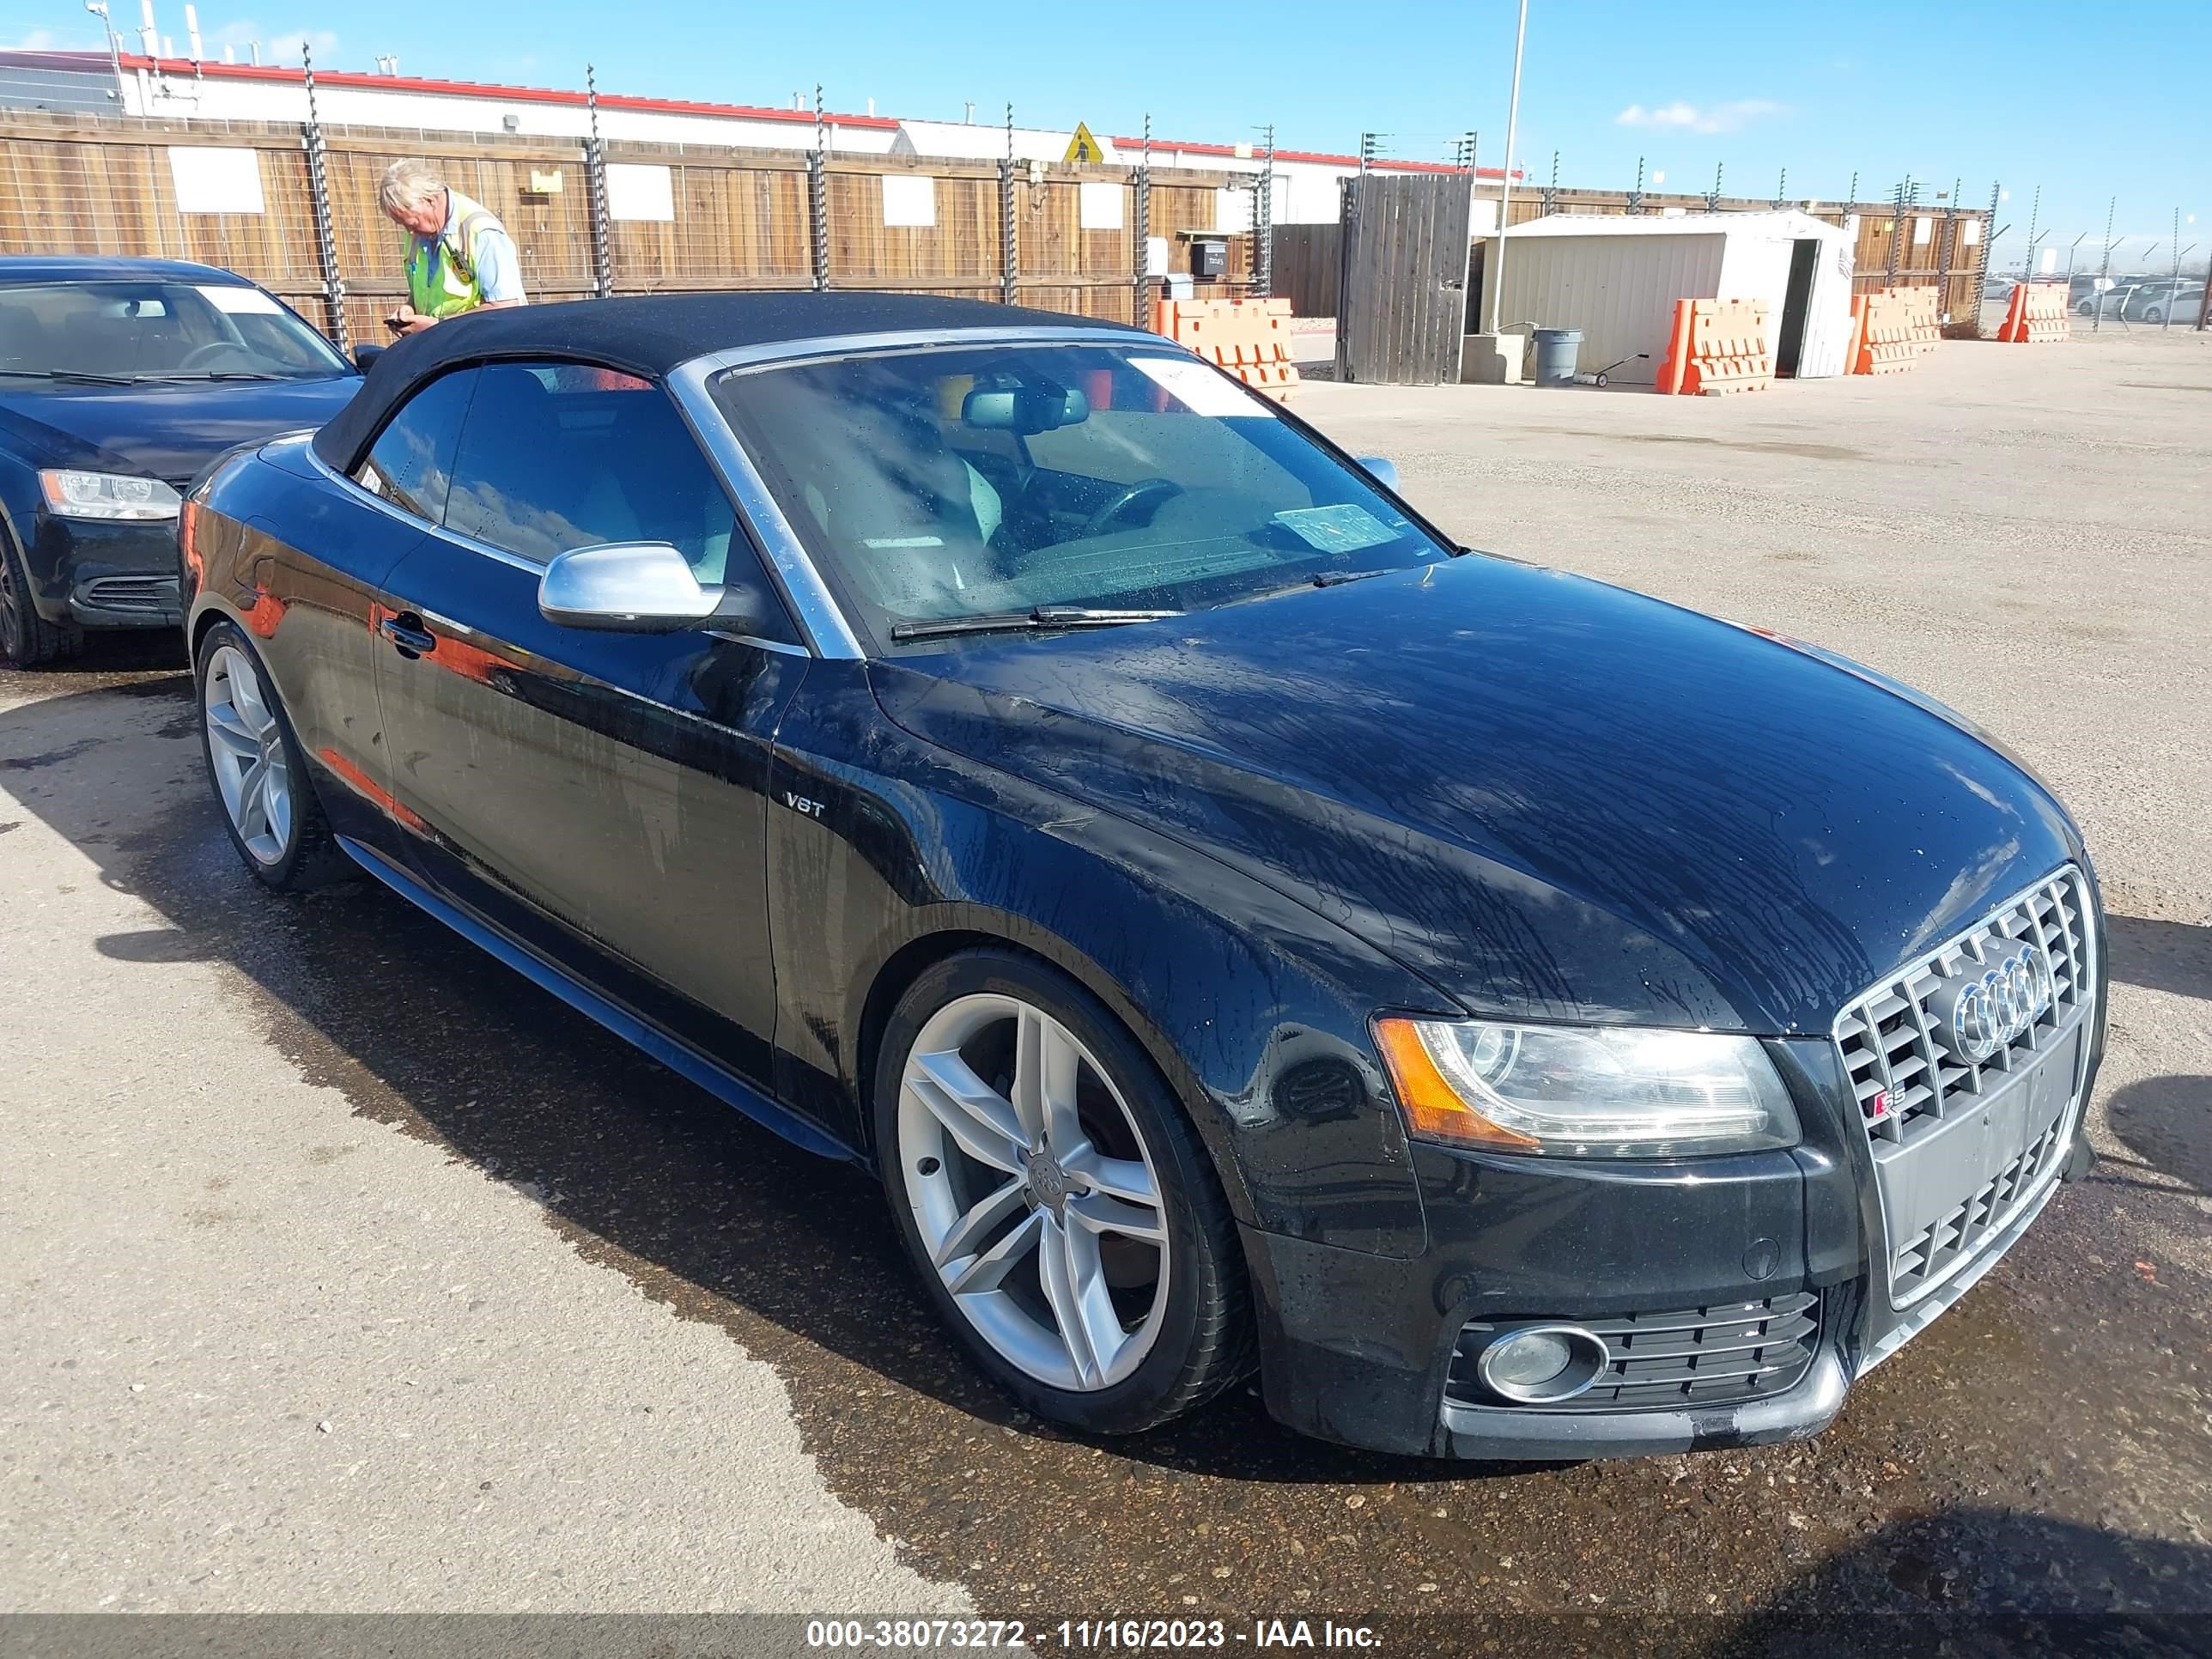 WAUVGAFH4BN009808  - AUDI S5  2011 IMG - 0